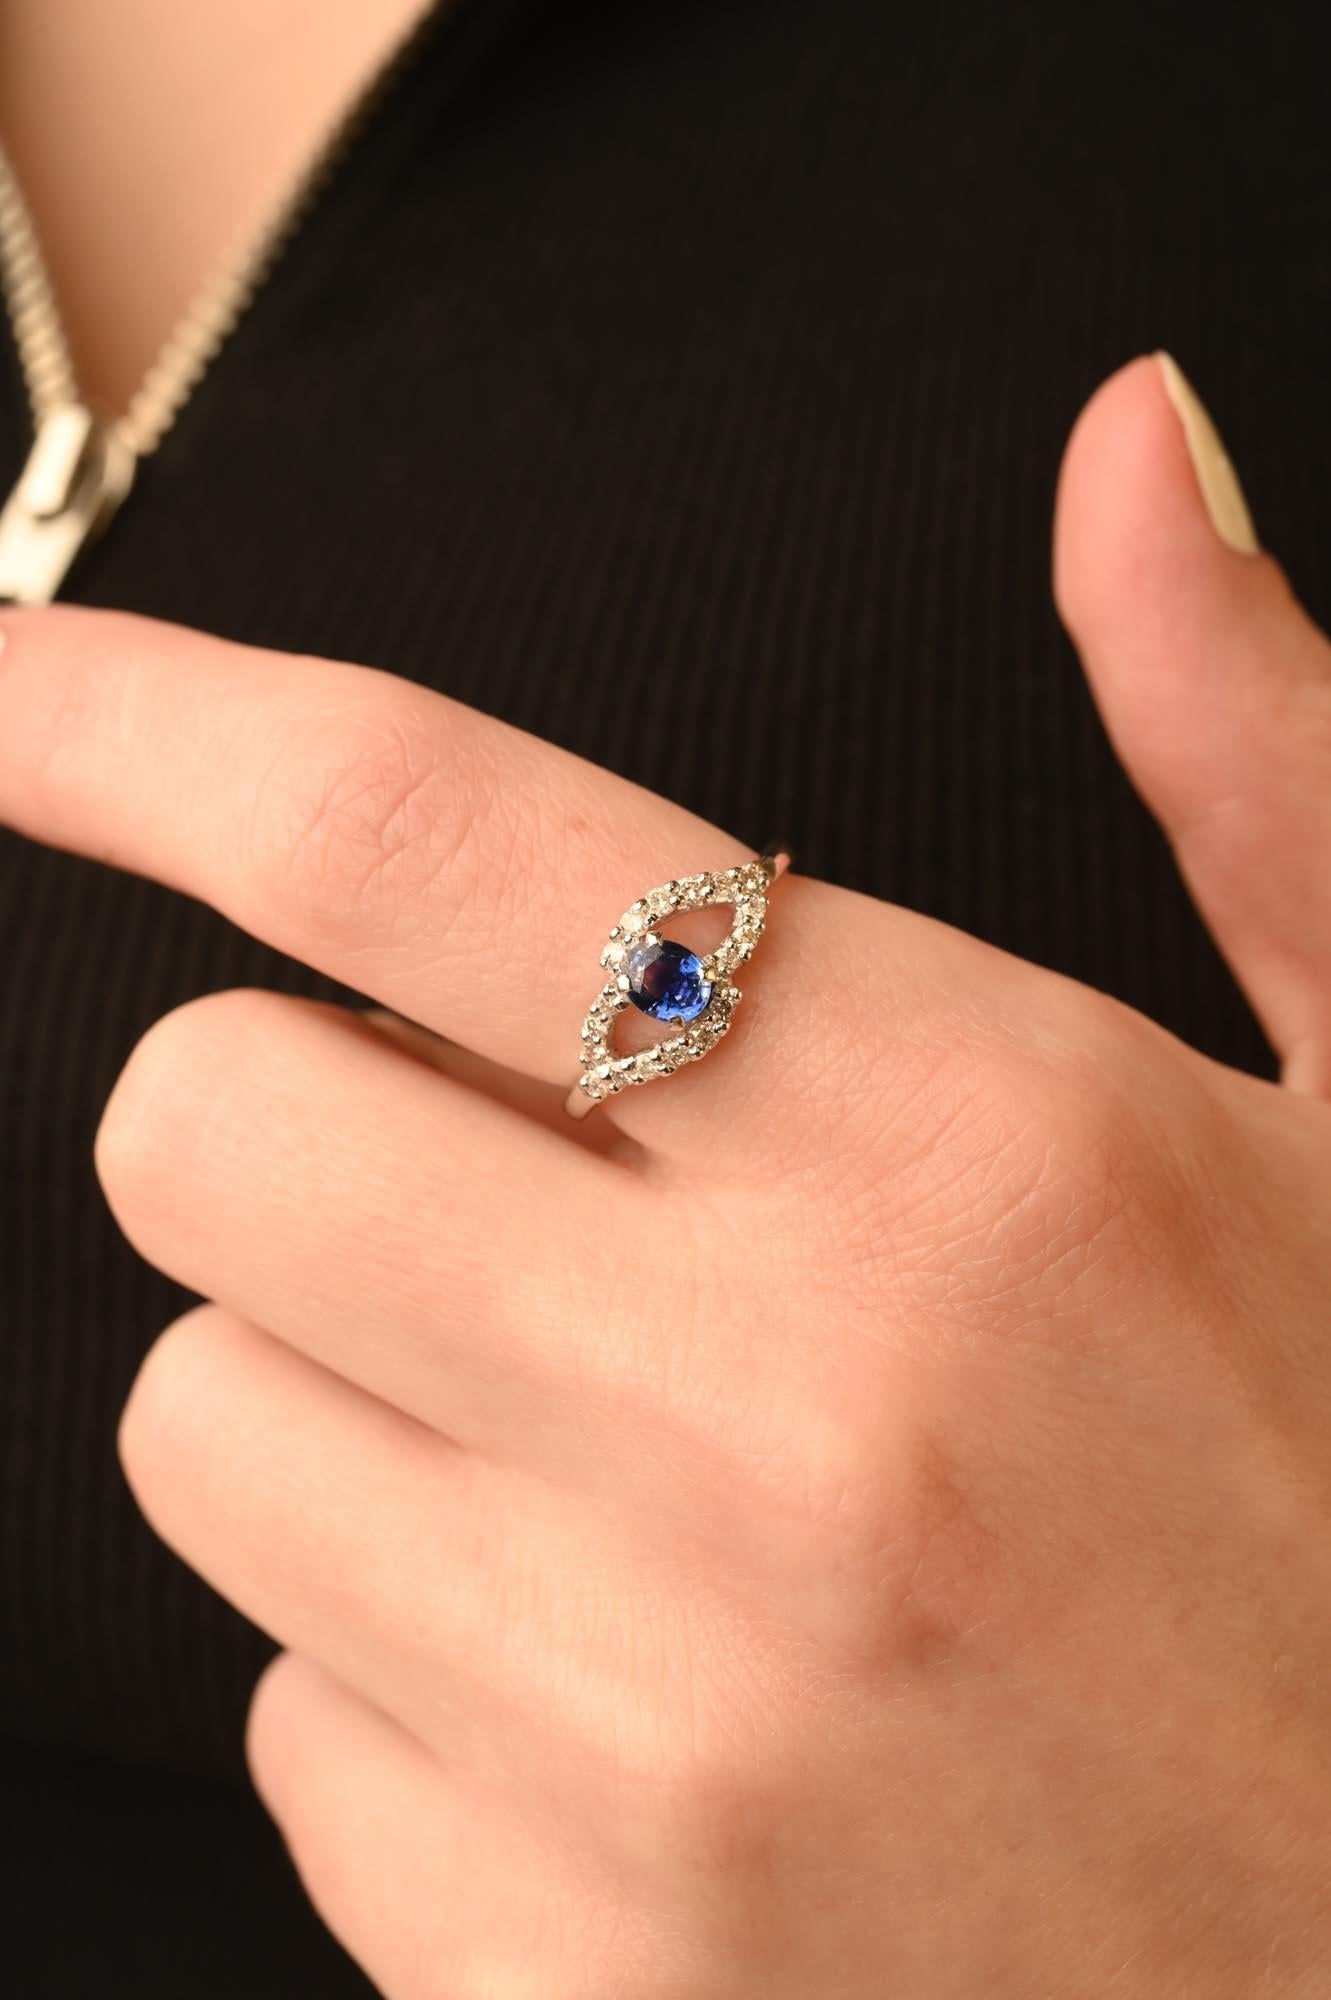 For Sale:  Alluring Blue Sapphire Ring with Diamonds Set in 14K Solid White Gold 10